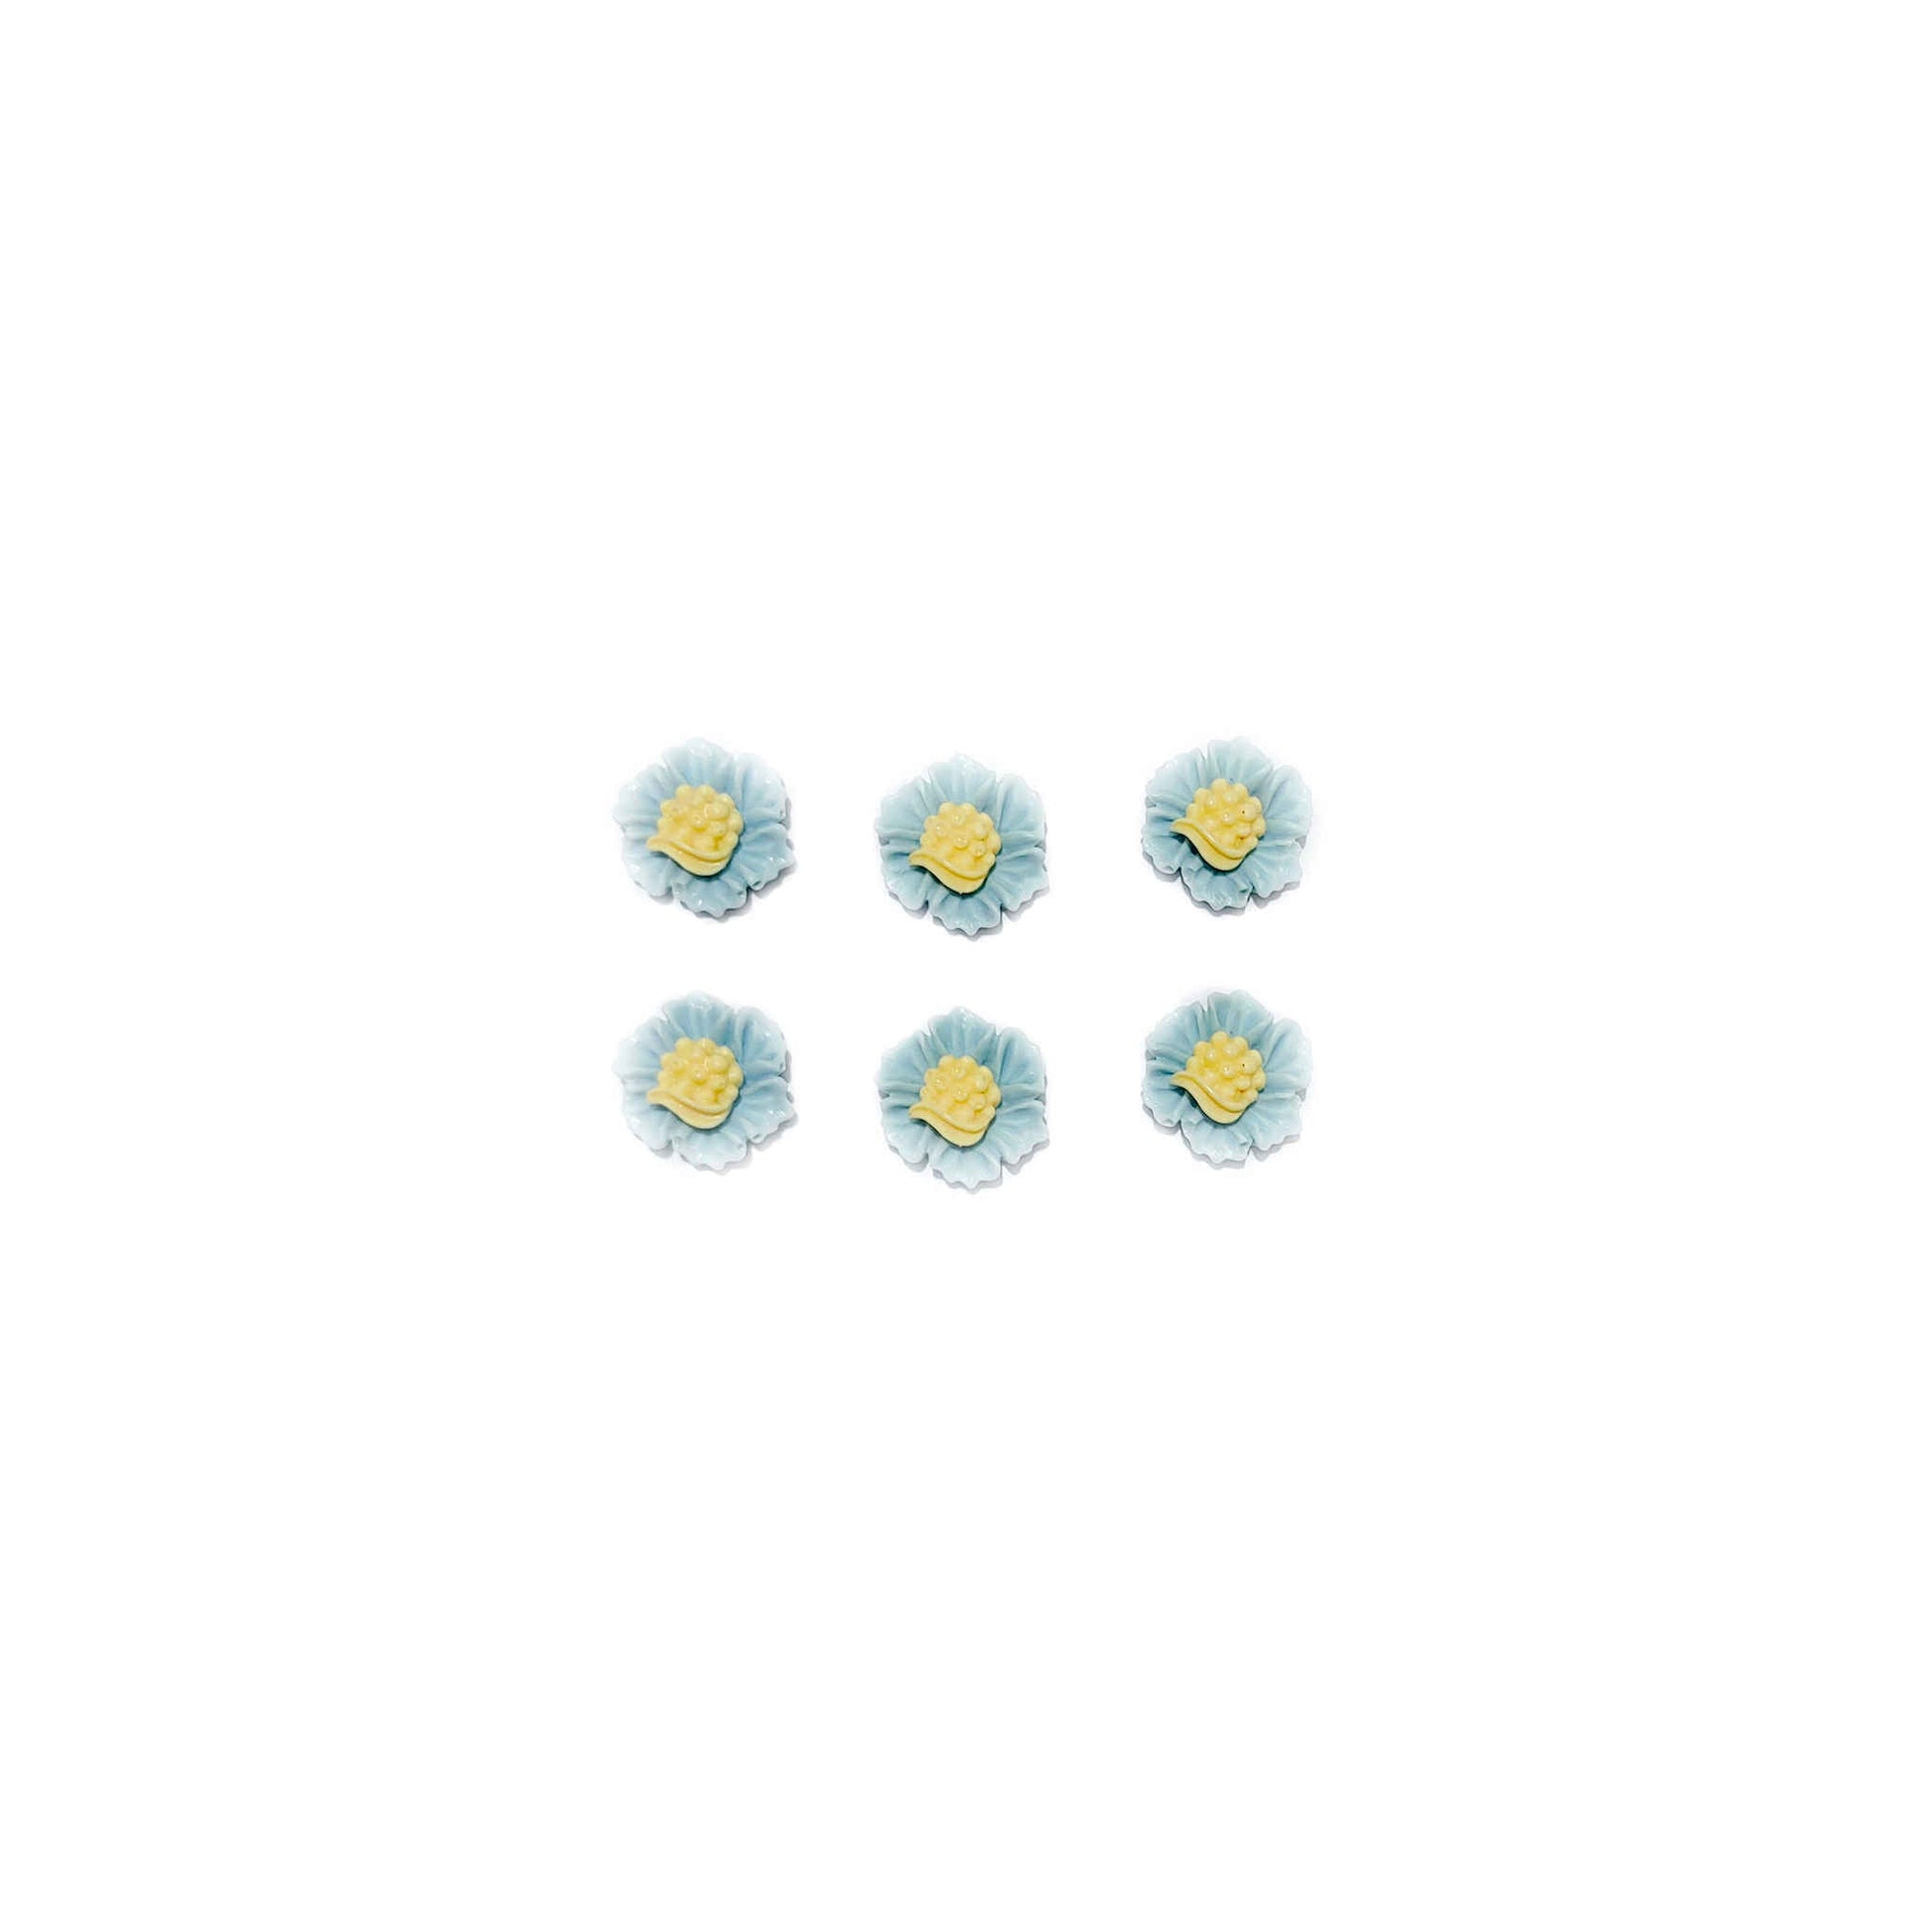 Indian Petals Flat Base Beautiful Floral 3D Cabochons for Craft Trousseau Packing or Decoration - Design 422, Style - Classic, Sky Blue